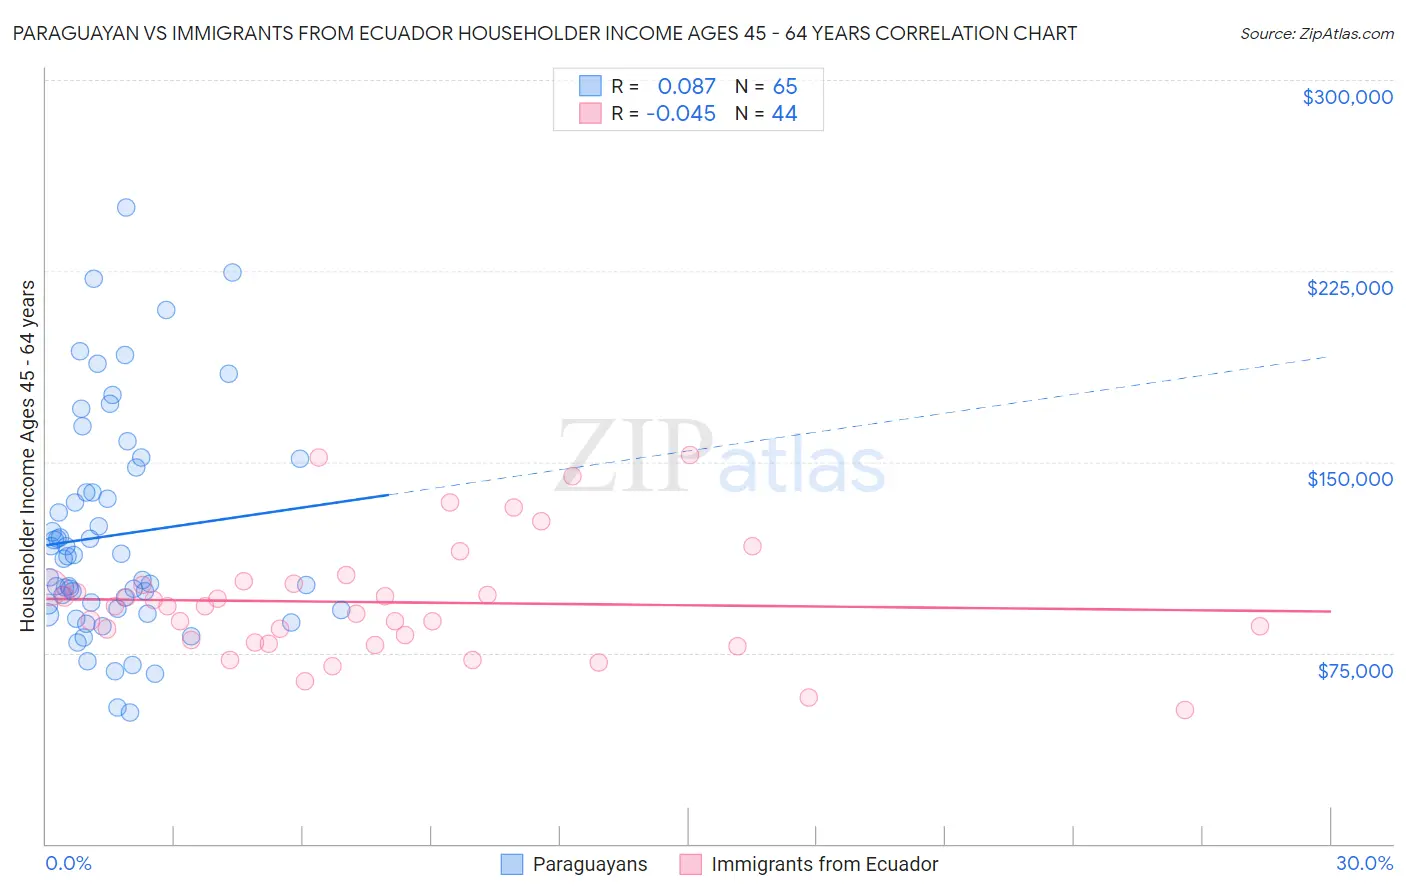 Paraguayan vs Immigrants from Ecuador Householder Income Ages 45 - 64 years